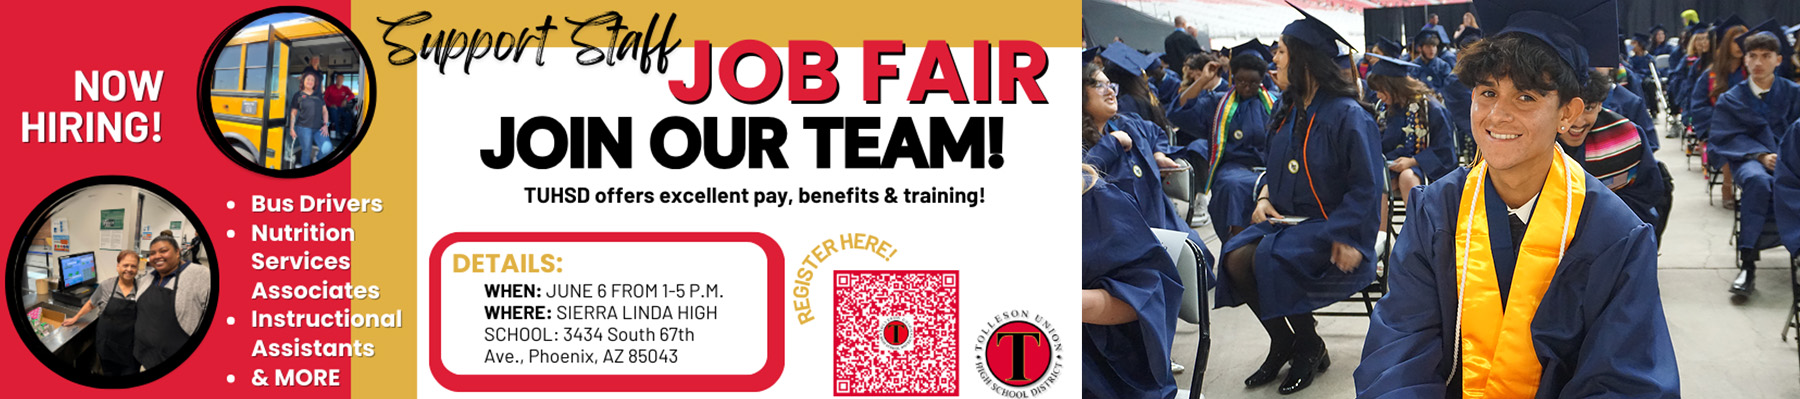 TUHSD Job Fair- we offer excellent pay, benefits, & training! Hiring bus drivers, nutrition services associates, instructional assistants & more. June 6 from 1-5 pm at Sierra Linda HS in Phoenix, AZ 85043 | Female bus drivers 